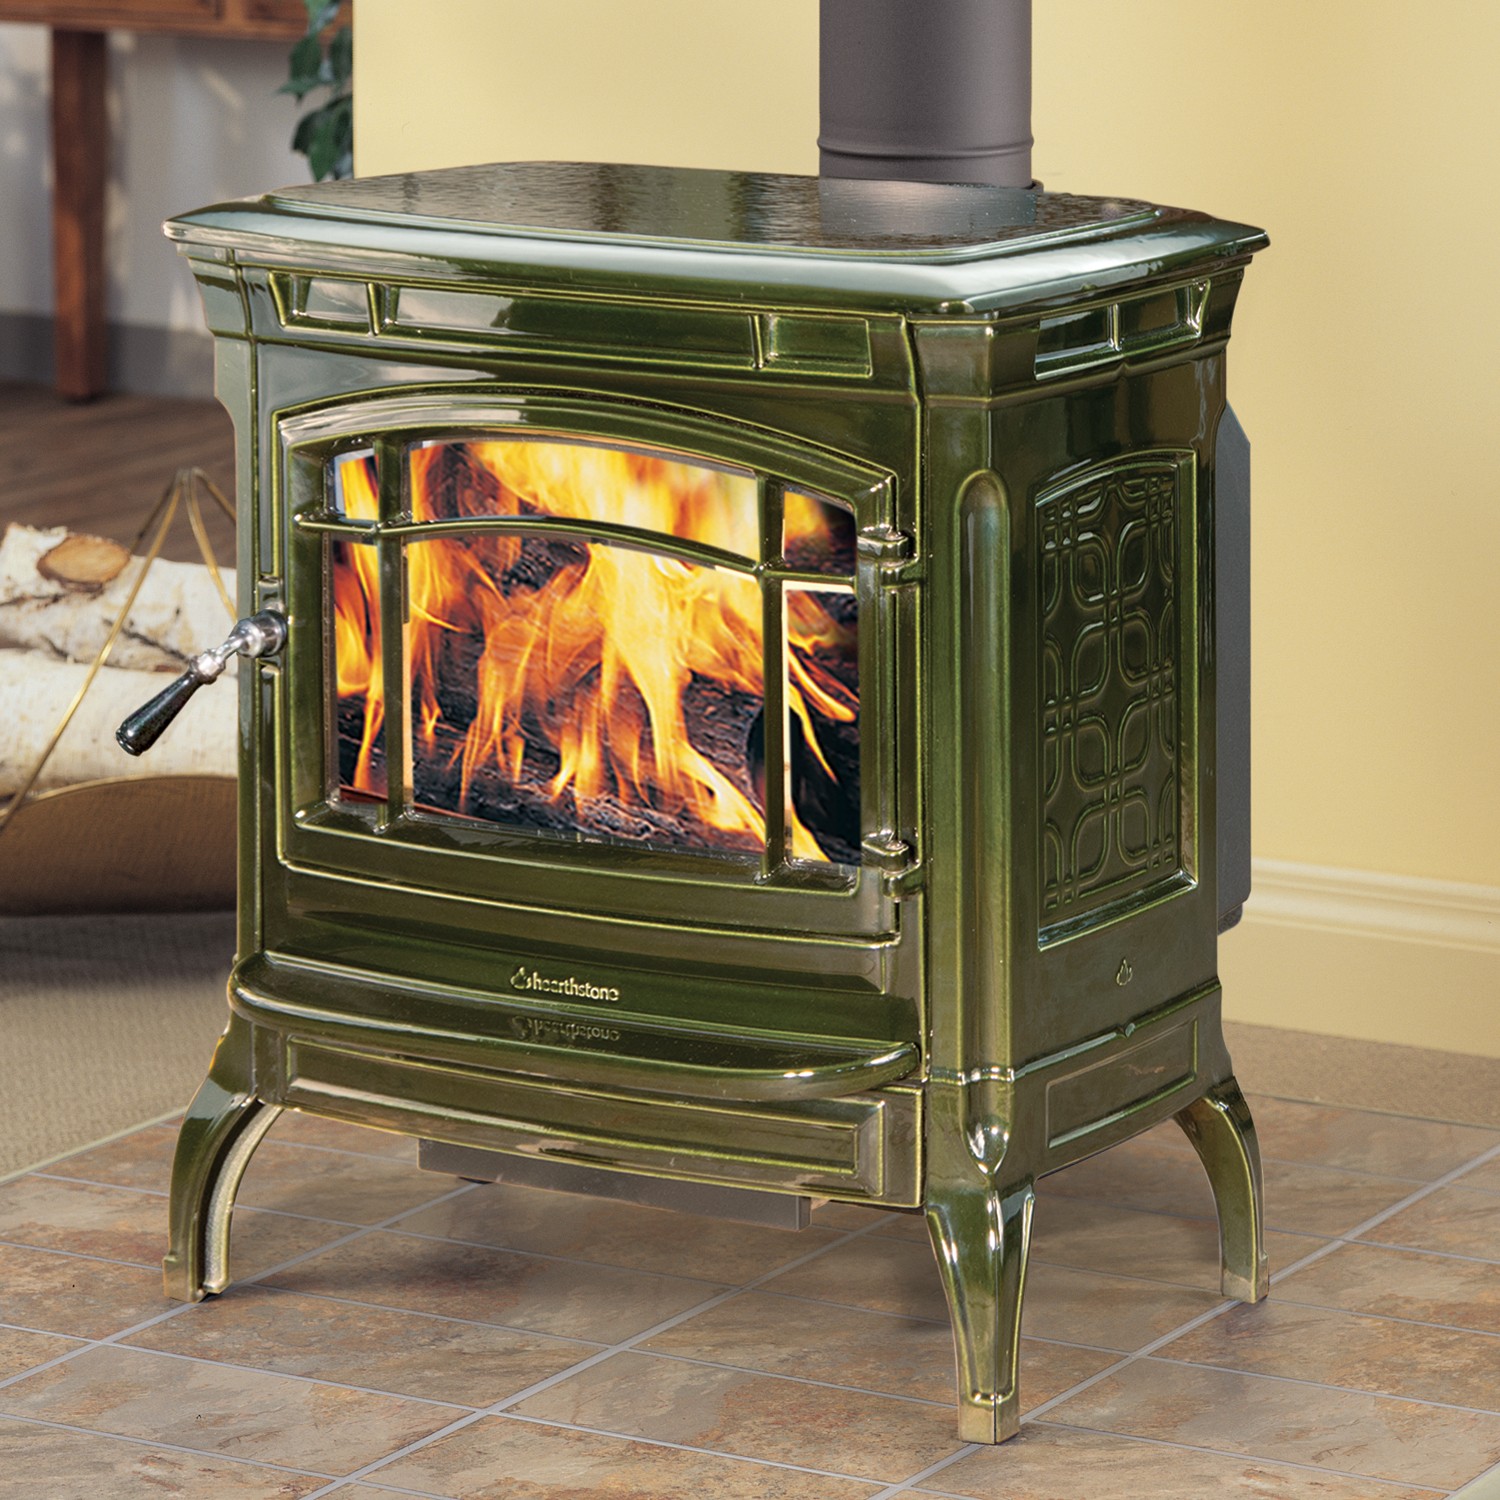 Shelburne 8371 Wood Stove in green cast iron with glass door and handle with designs o the side.  Cream colored wall in the background and terra cotta tile on the hearth.